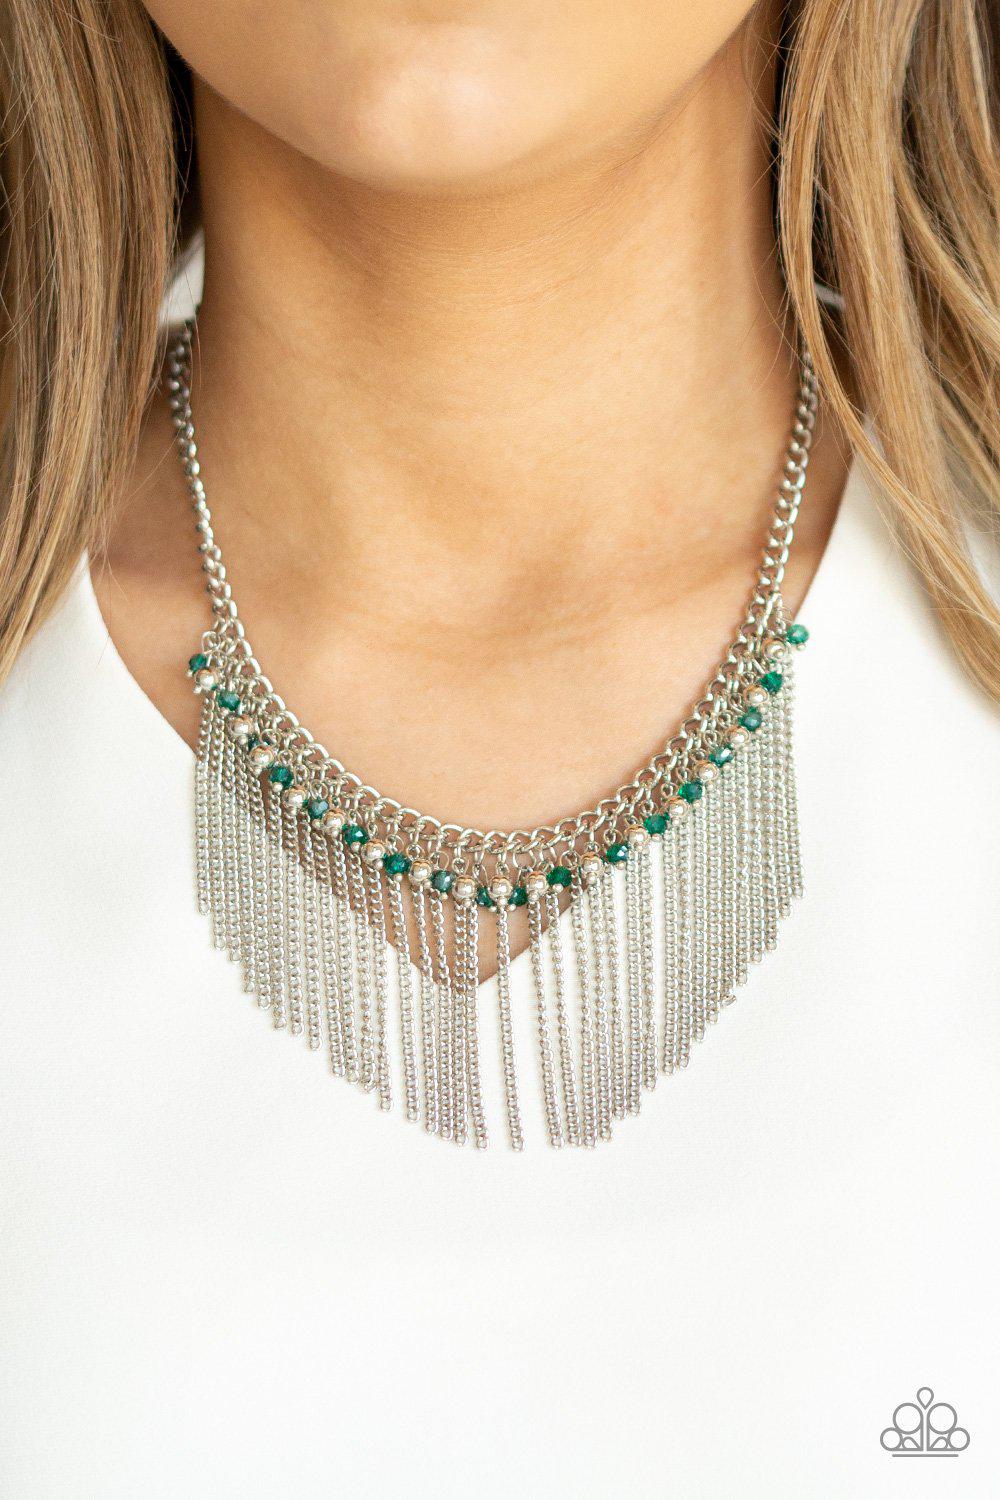 Divinely Diva Green and Silver Necklace - Paparazzi Accessories - lightbox -CarasShop.com - $5 Jewelry by Cara Jewels